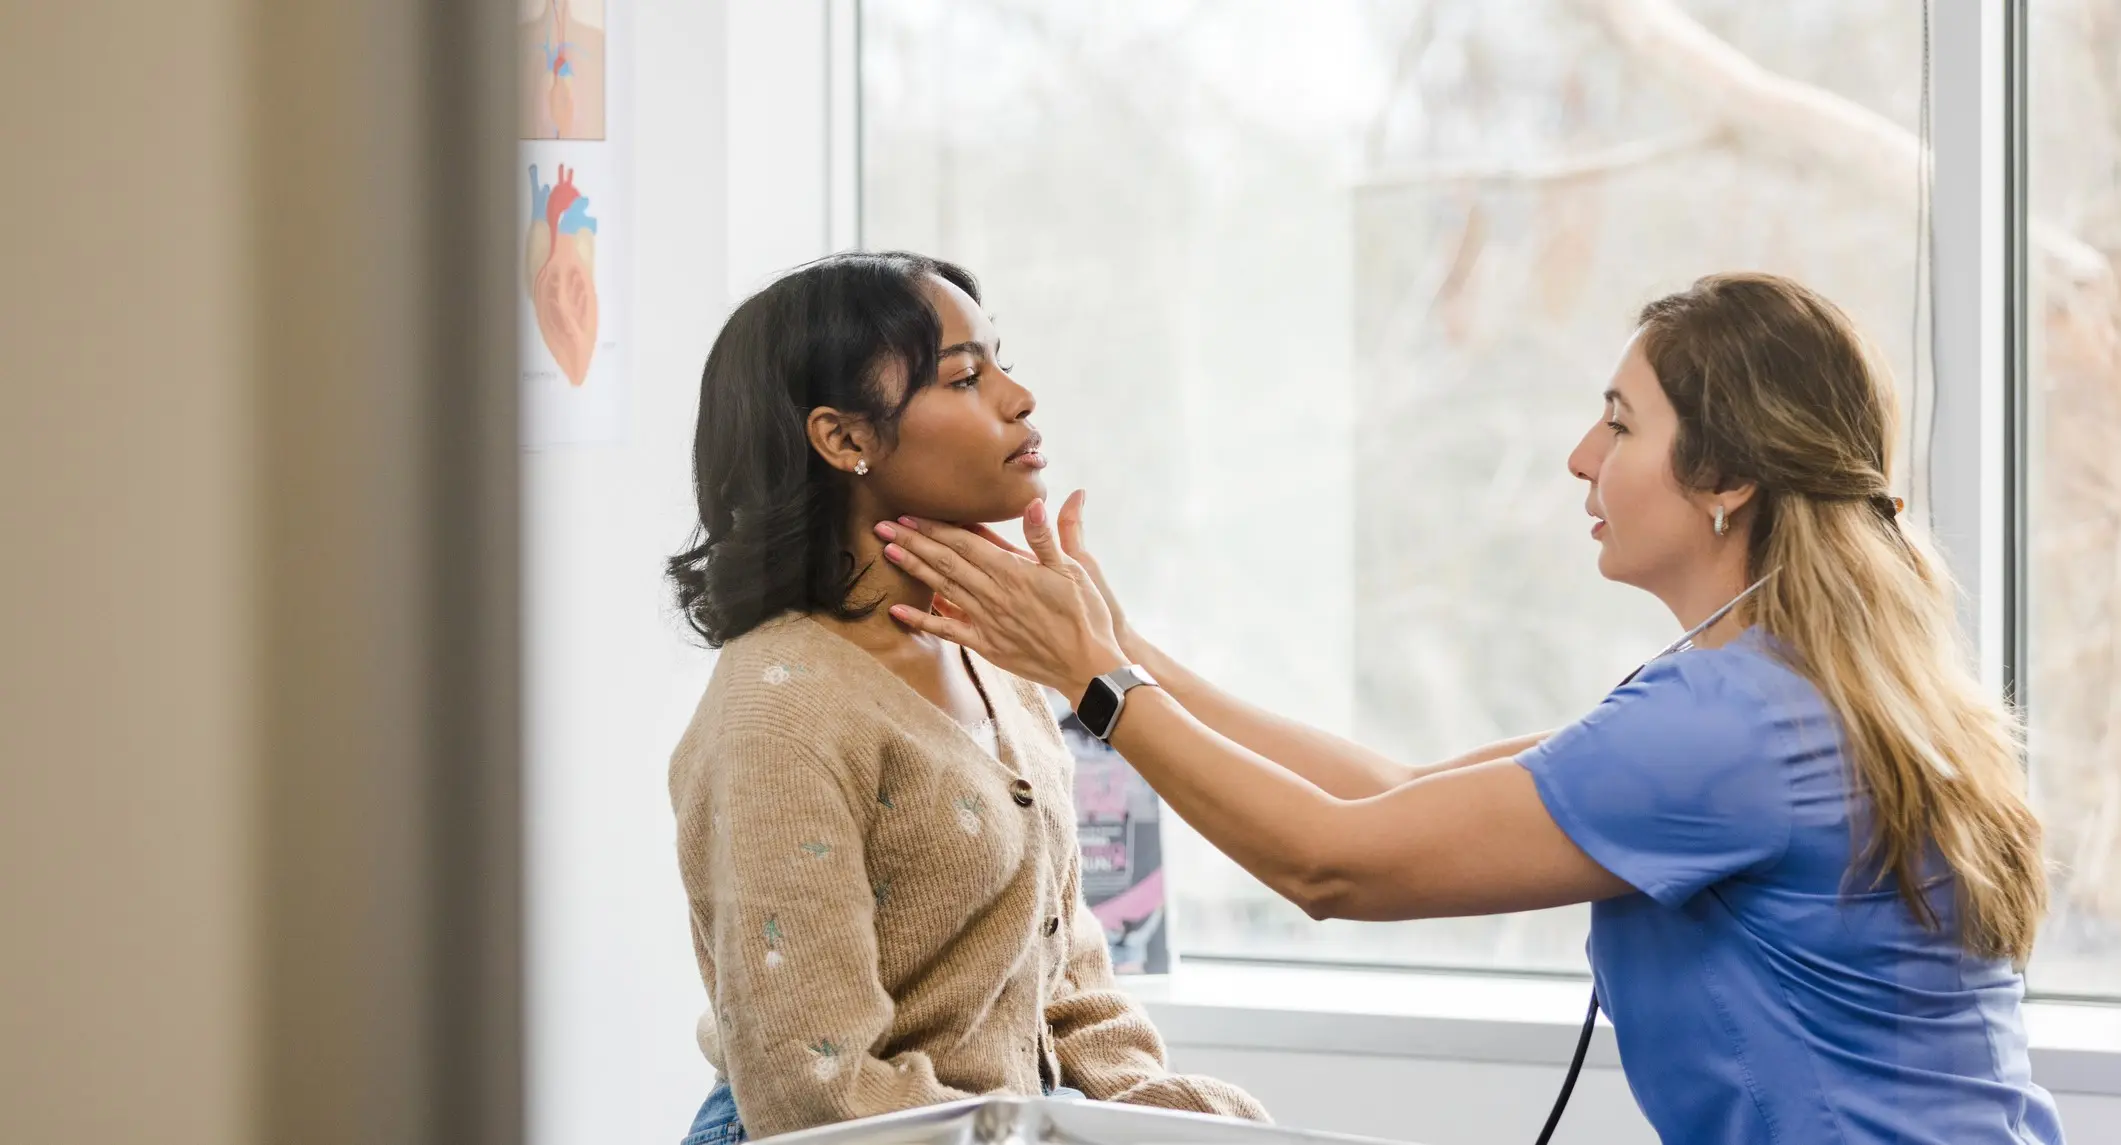 Doctor checking patient with swollen lymph nodes after drinking